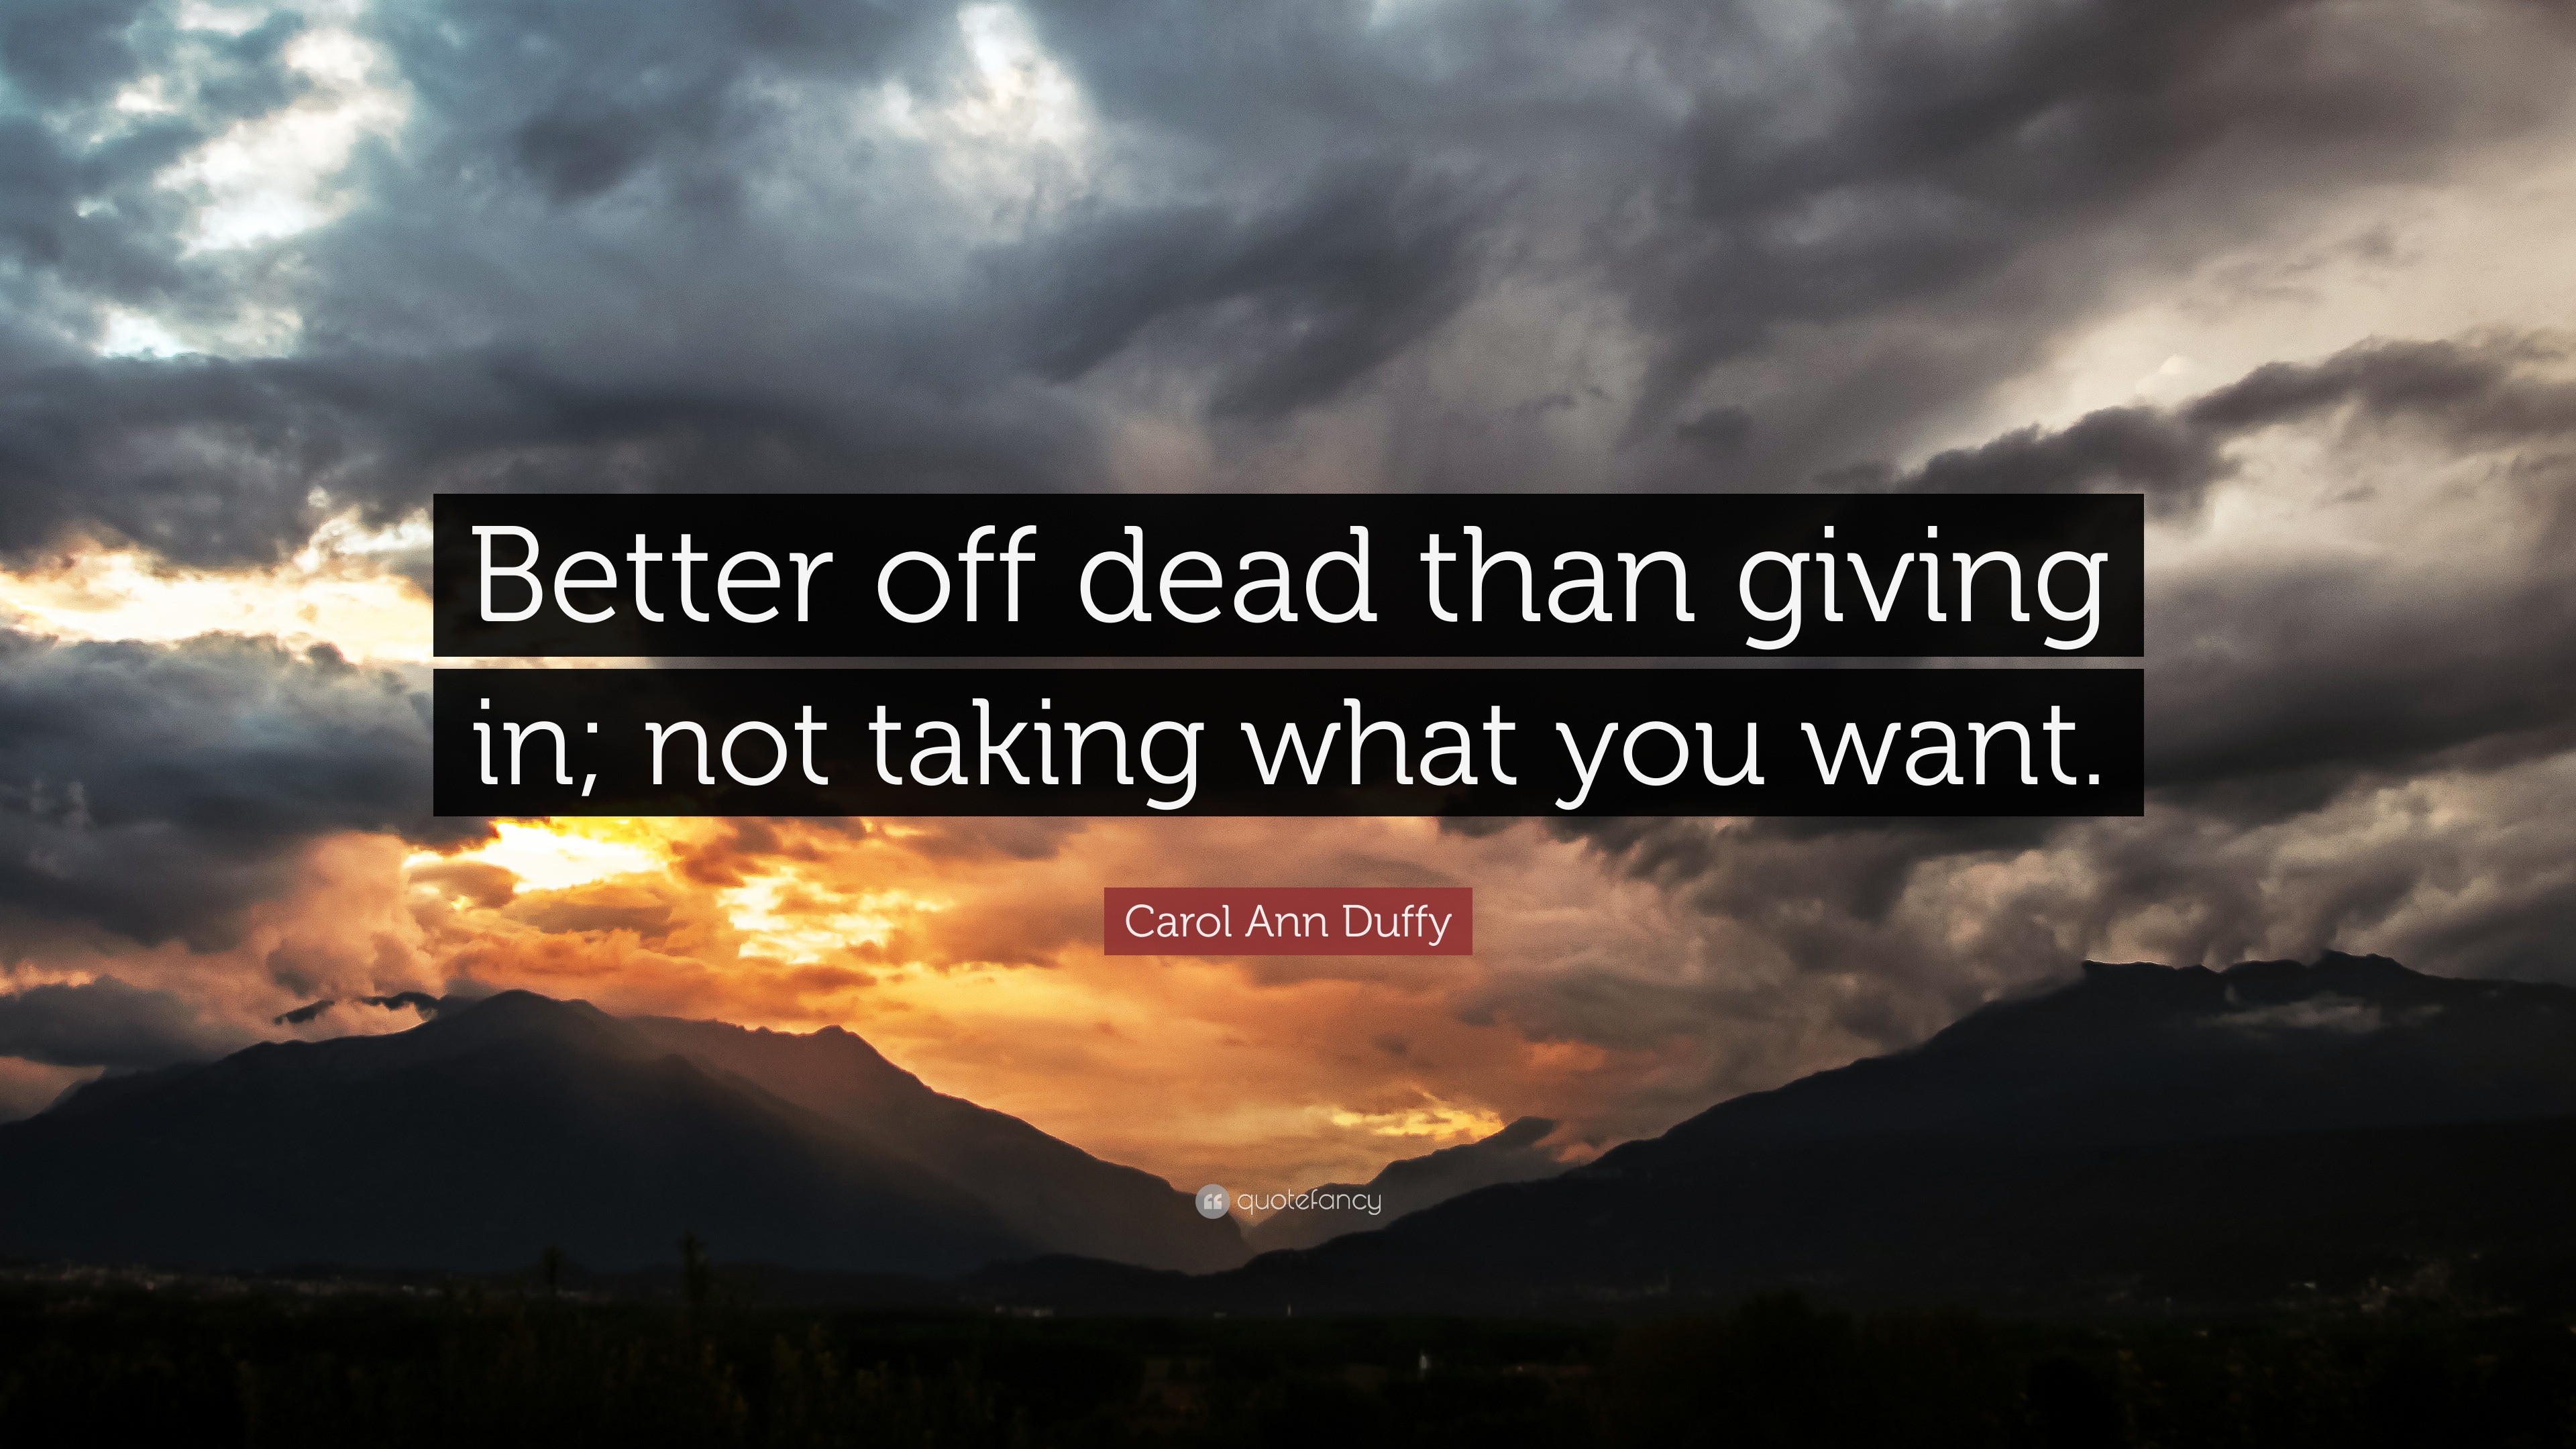 Skråstreg virkelighed død Carol Ann Duffy Quote: “Better off dead than giving in; not taking what you  want.”